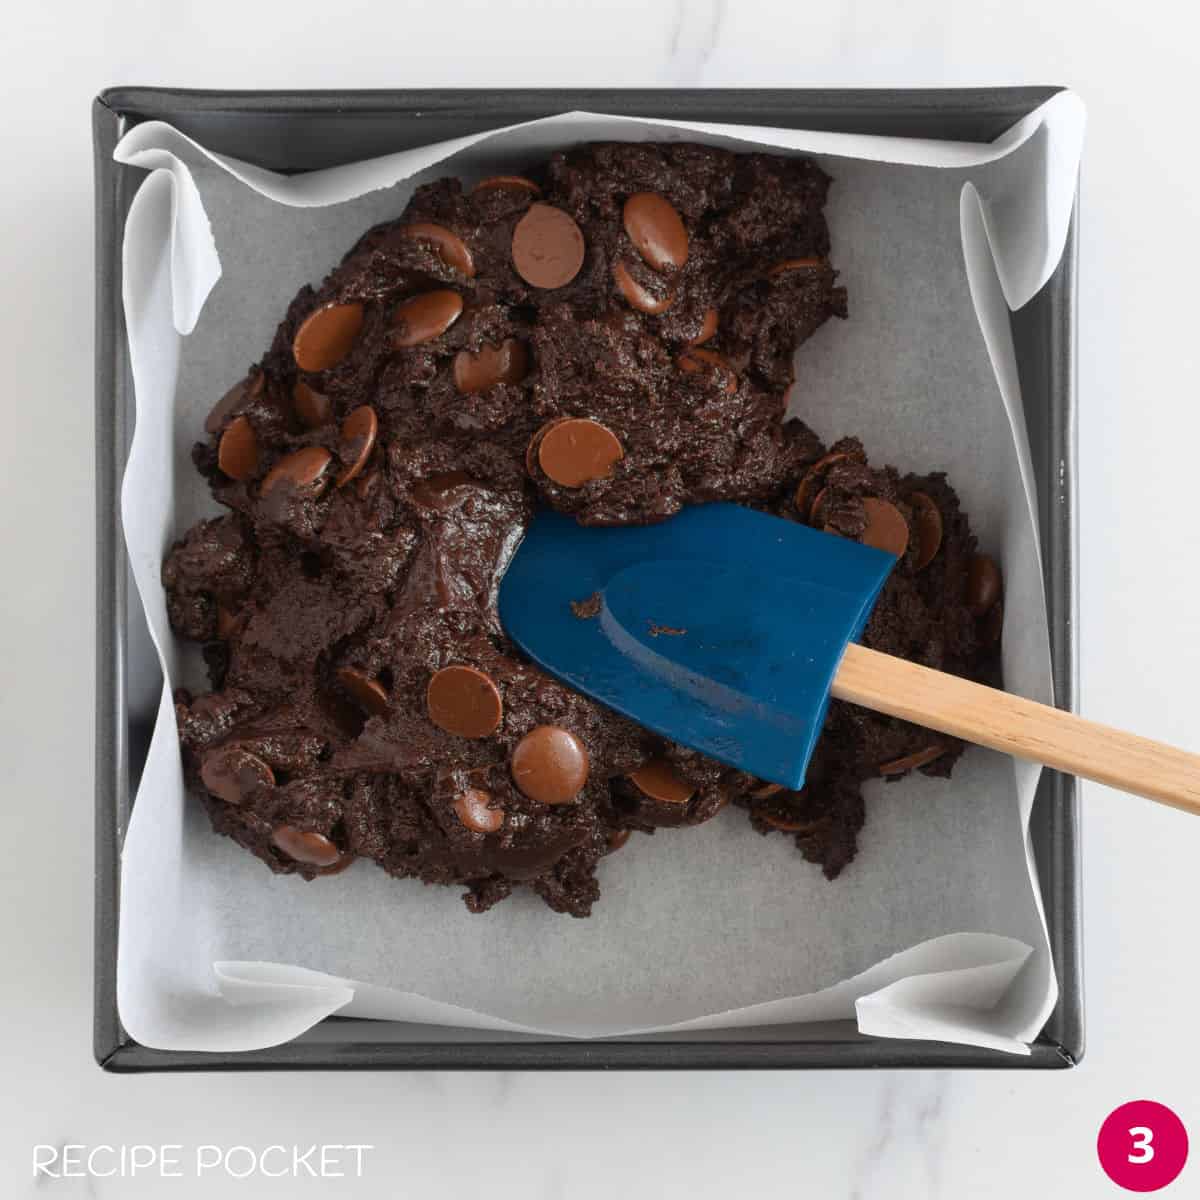 Brownie batter with chocolate chips in a cake tin lined with parchment paper.